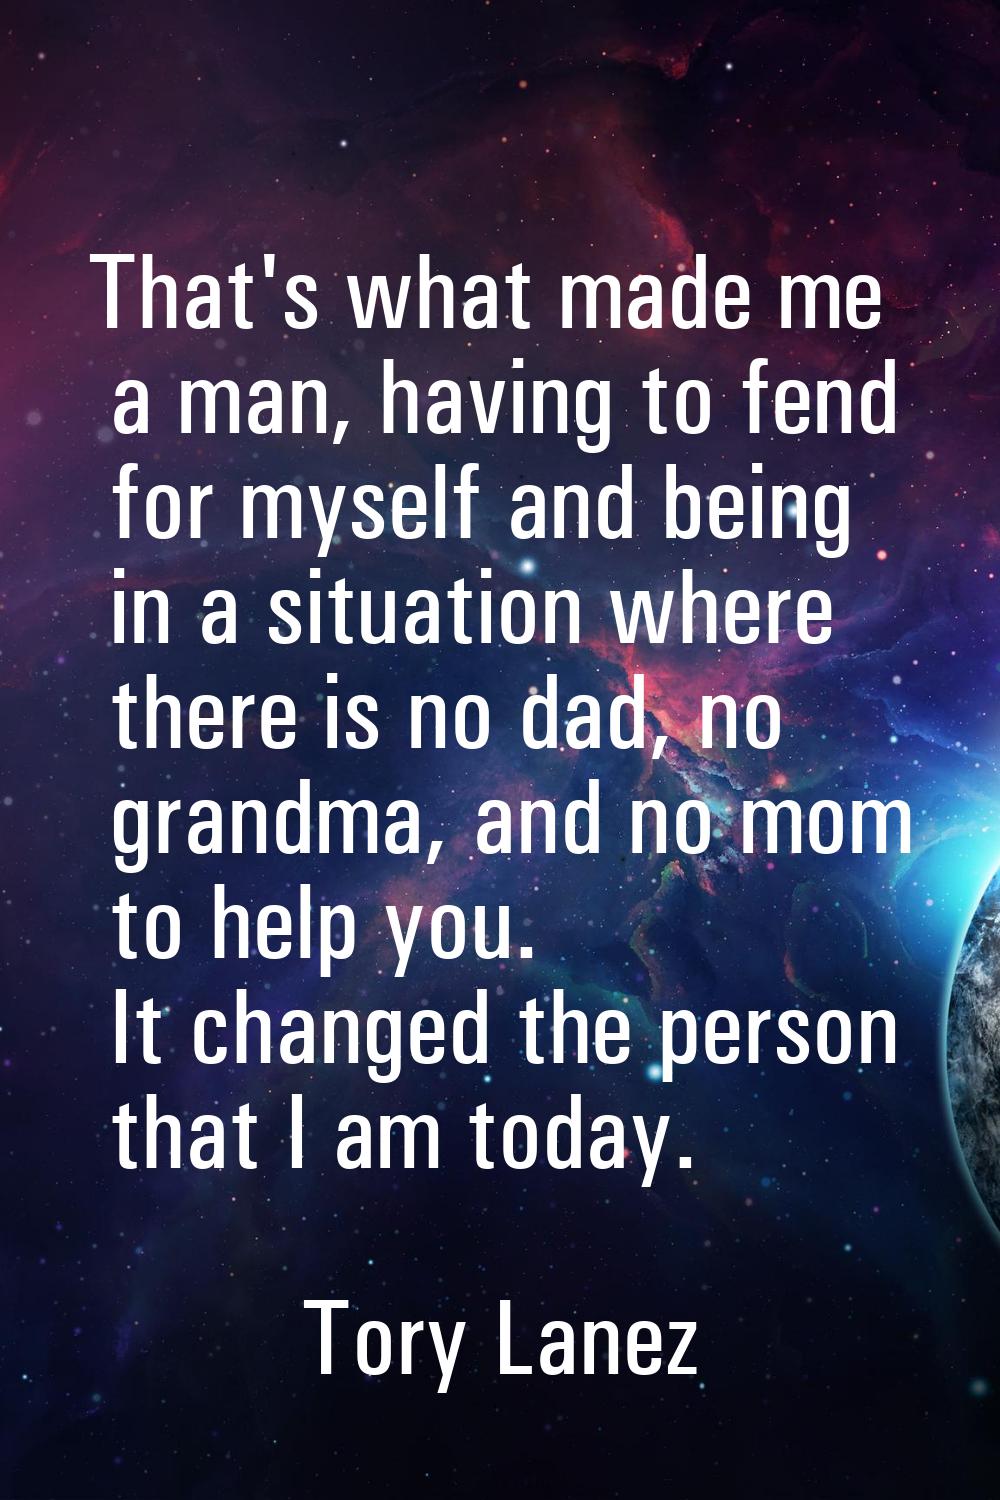 That's what made me a man, having to fend for myself and being in a situation where there is no dad